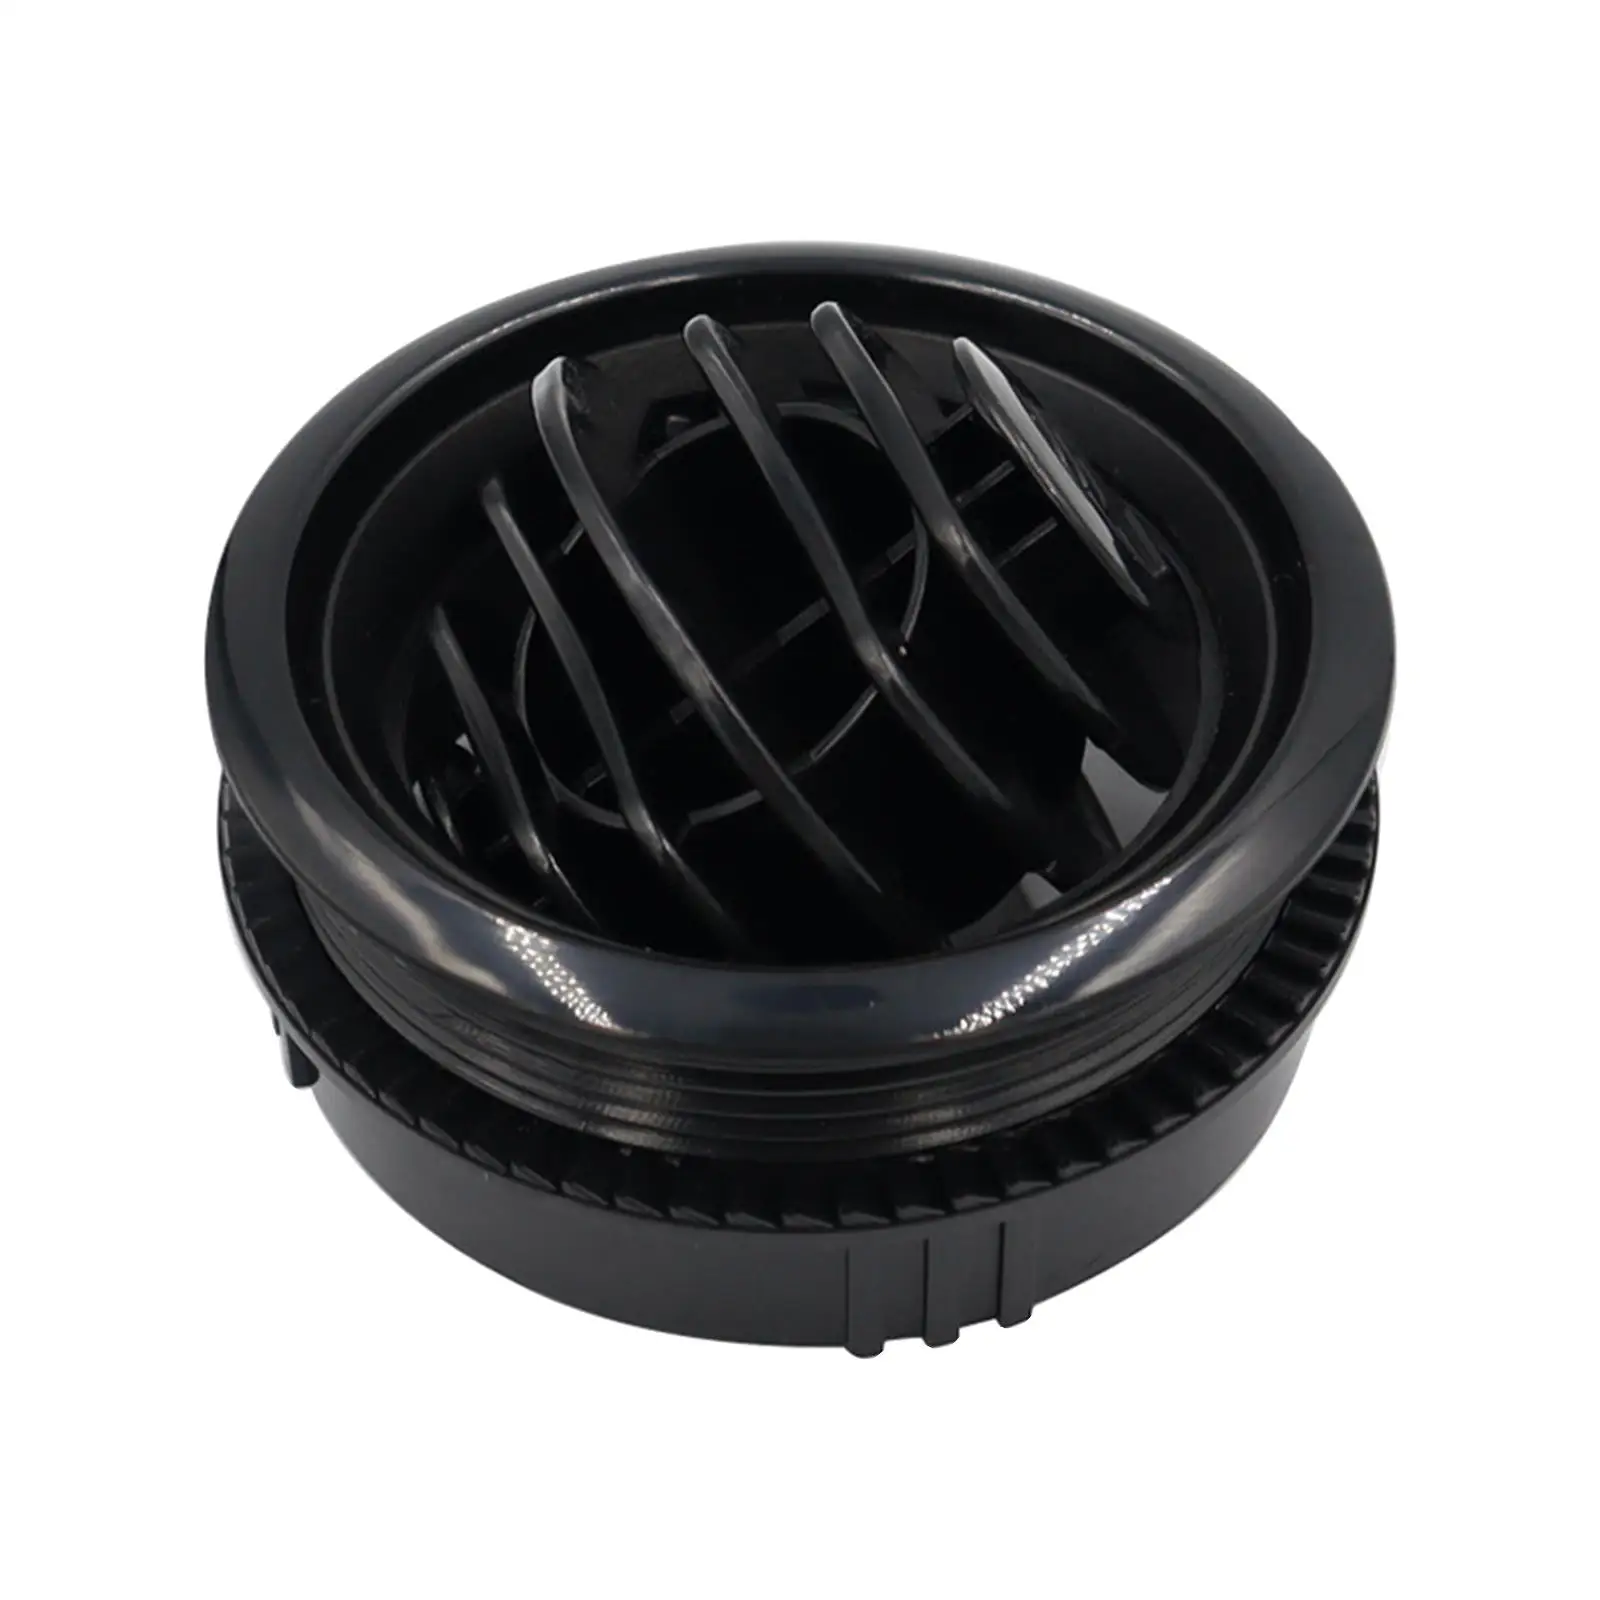  Air Duct Vent 63mm Mount Round Fit for Rvs Delivery Cars Sleeper Cabs